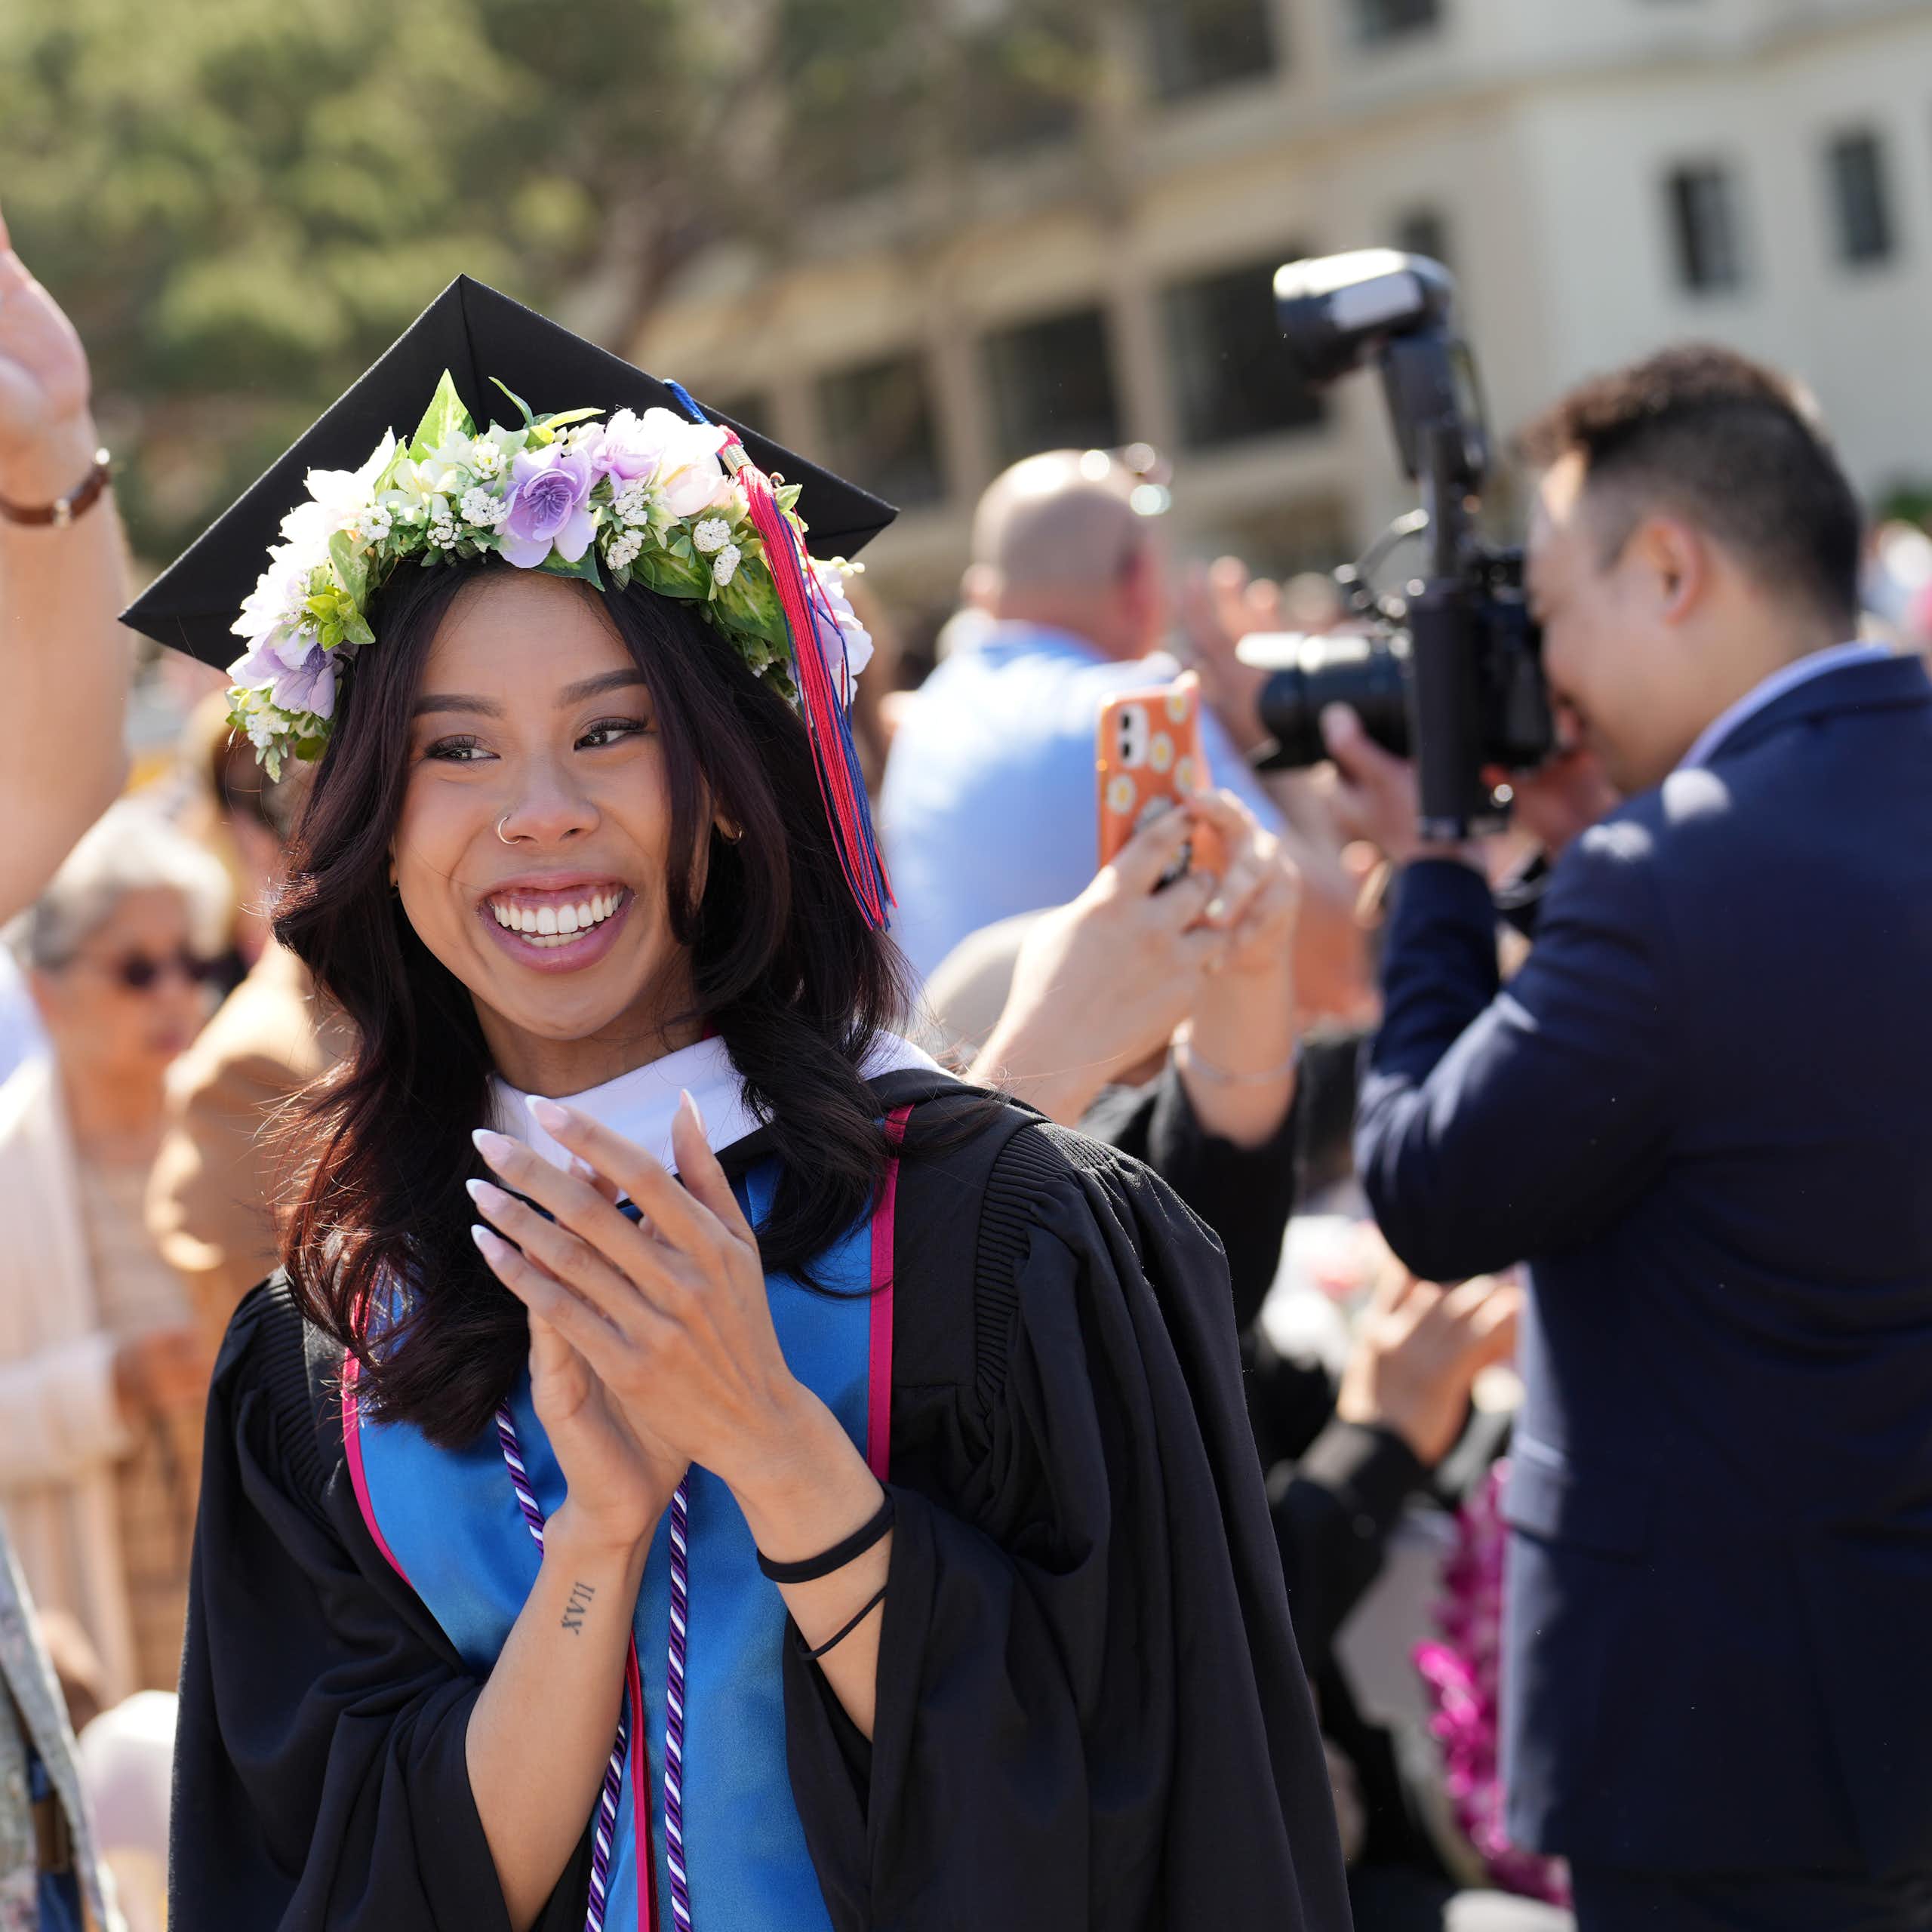 A young woman in a graduation gown and string of flowers around her head smiles as others standing near her take pictures.